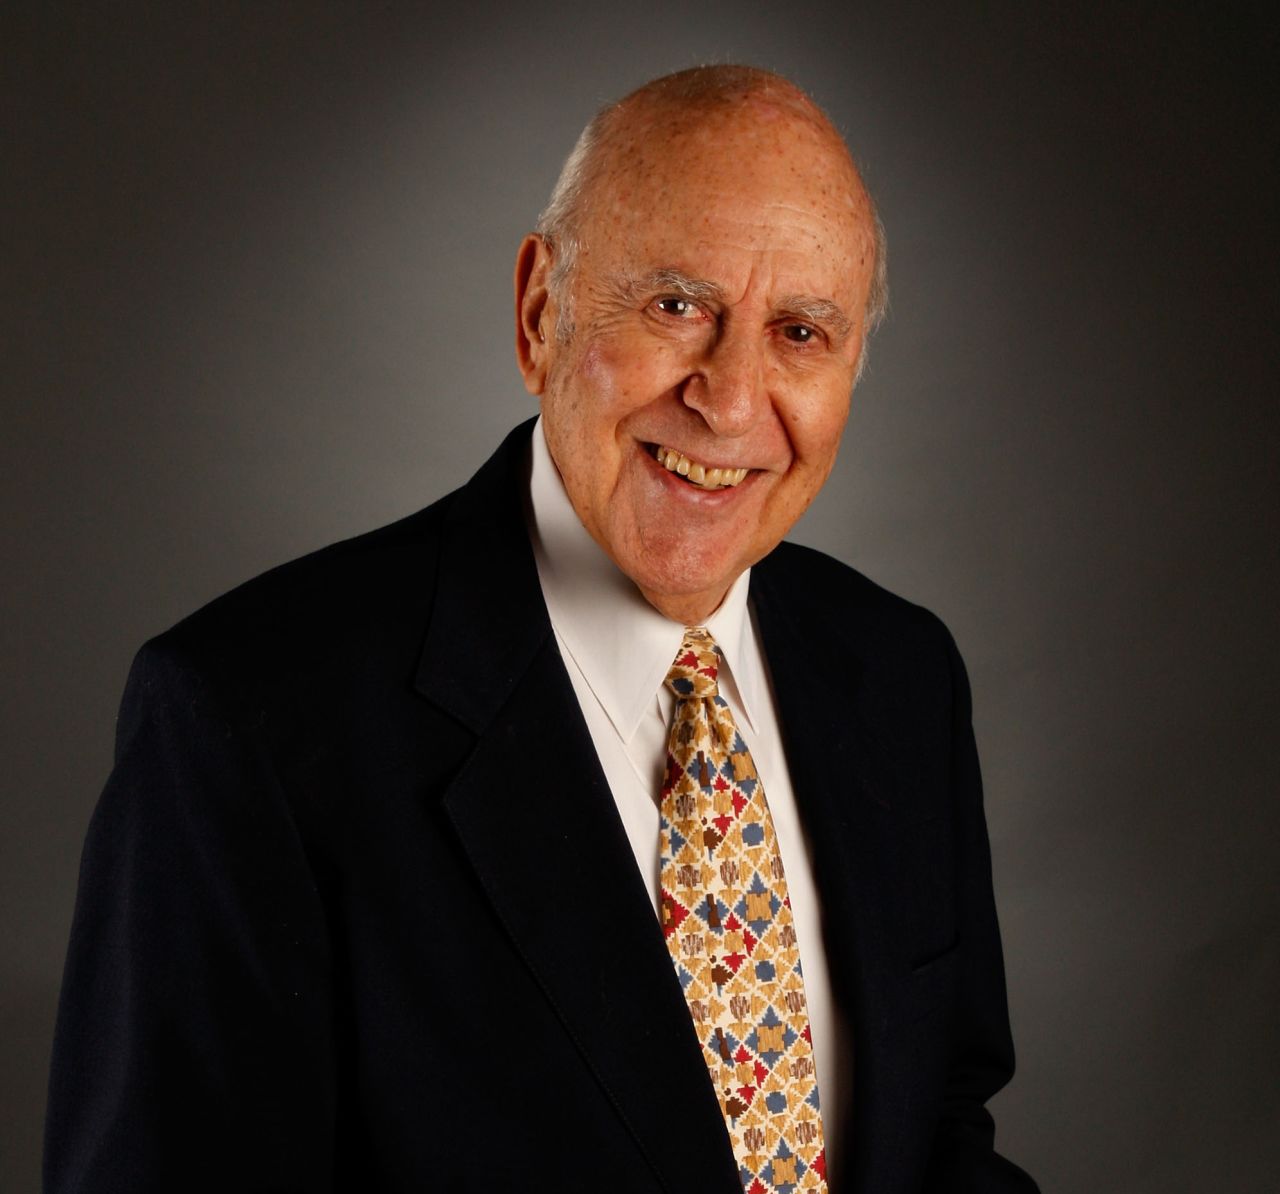 Carl Reiner poses for a portrait during the 2007 American Film Institute festival in Hollywood.